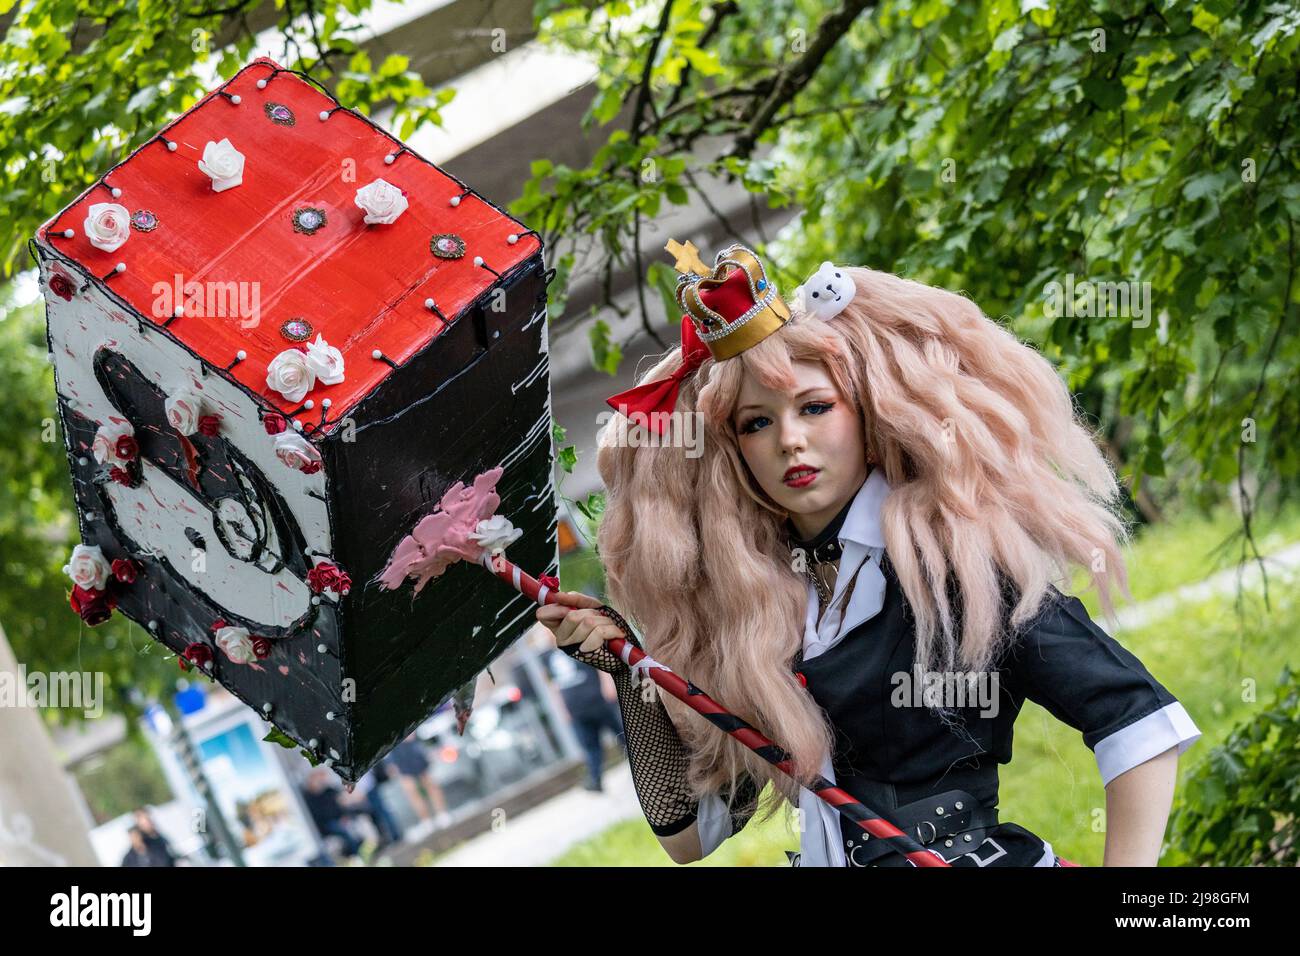 Düsseldorf, Germany. 21 May 2022. Cosplayers in colourful costumes. The annual Japan Day festival attracts hundreds of thousands of visitors. Many dress in colourful Manga Anime costumes. Photo: Vibrant Pictures/Alamy Live News Stock Photo